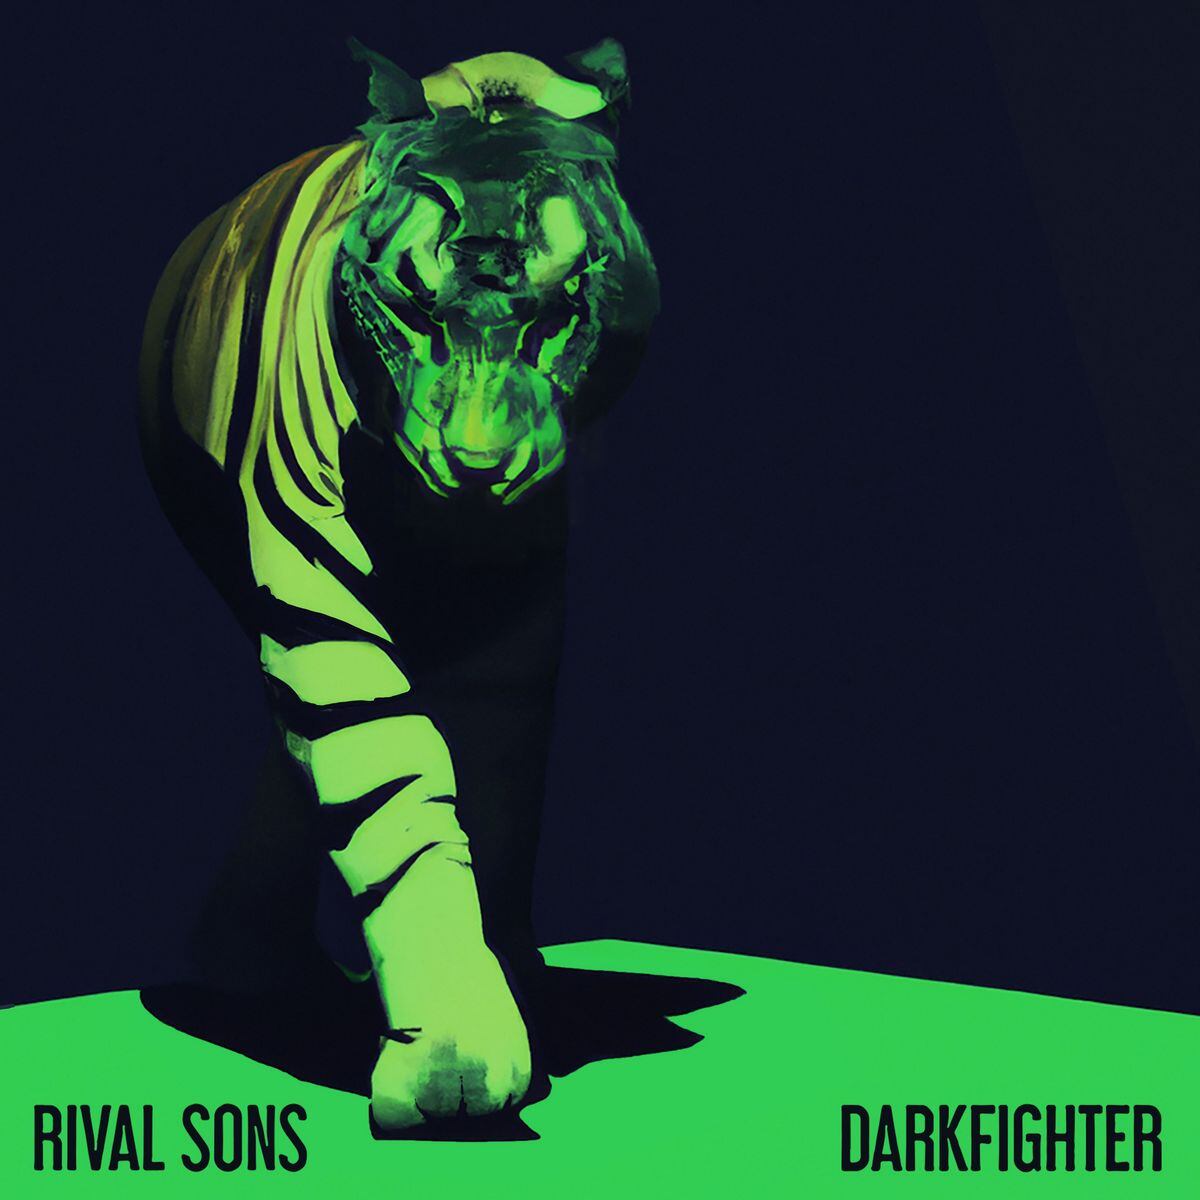 Cover of 'Darkfighter', by Rival Sons.